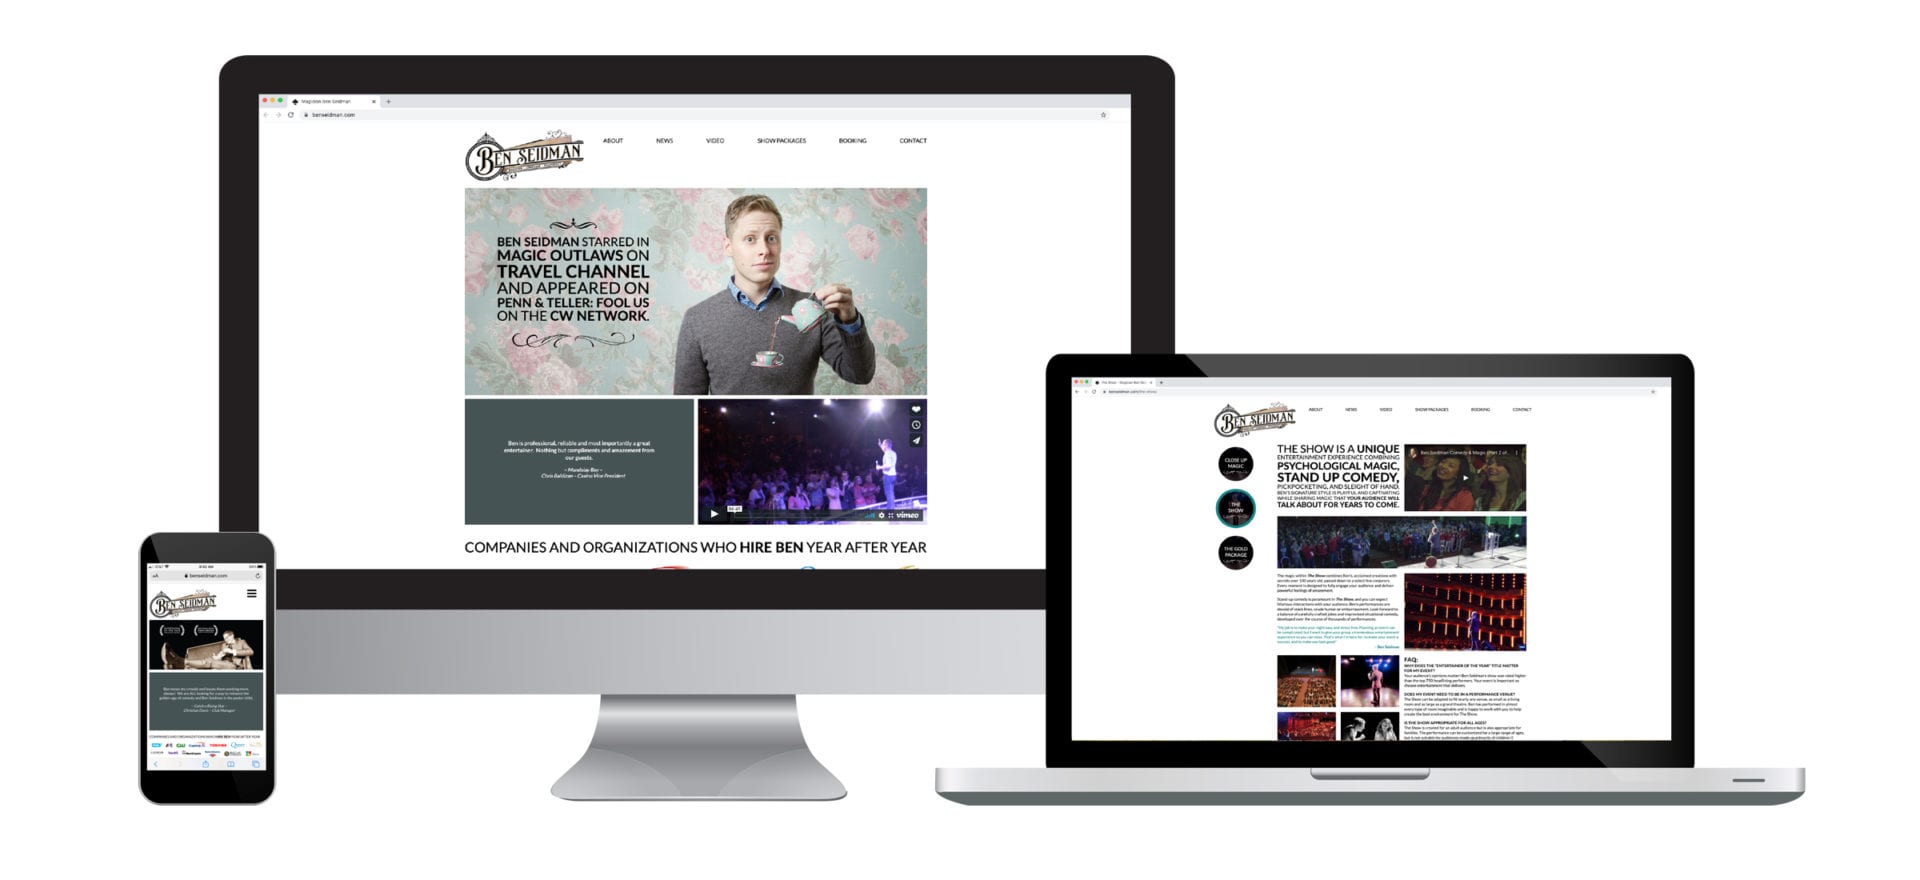 A desktop computer, laptop and smartphone displaying the Ben Seidman Magician website, designed by Canyon Creative